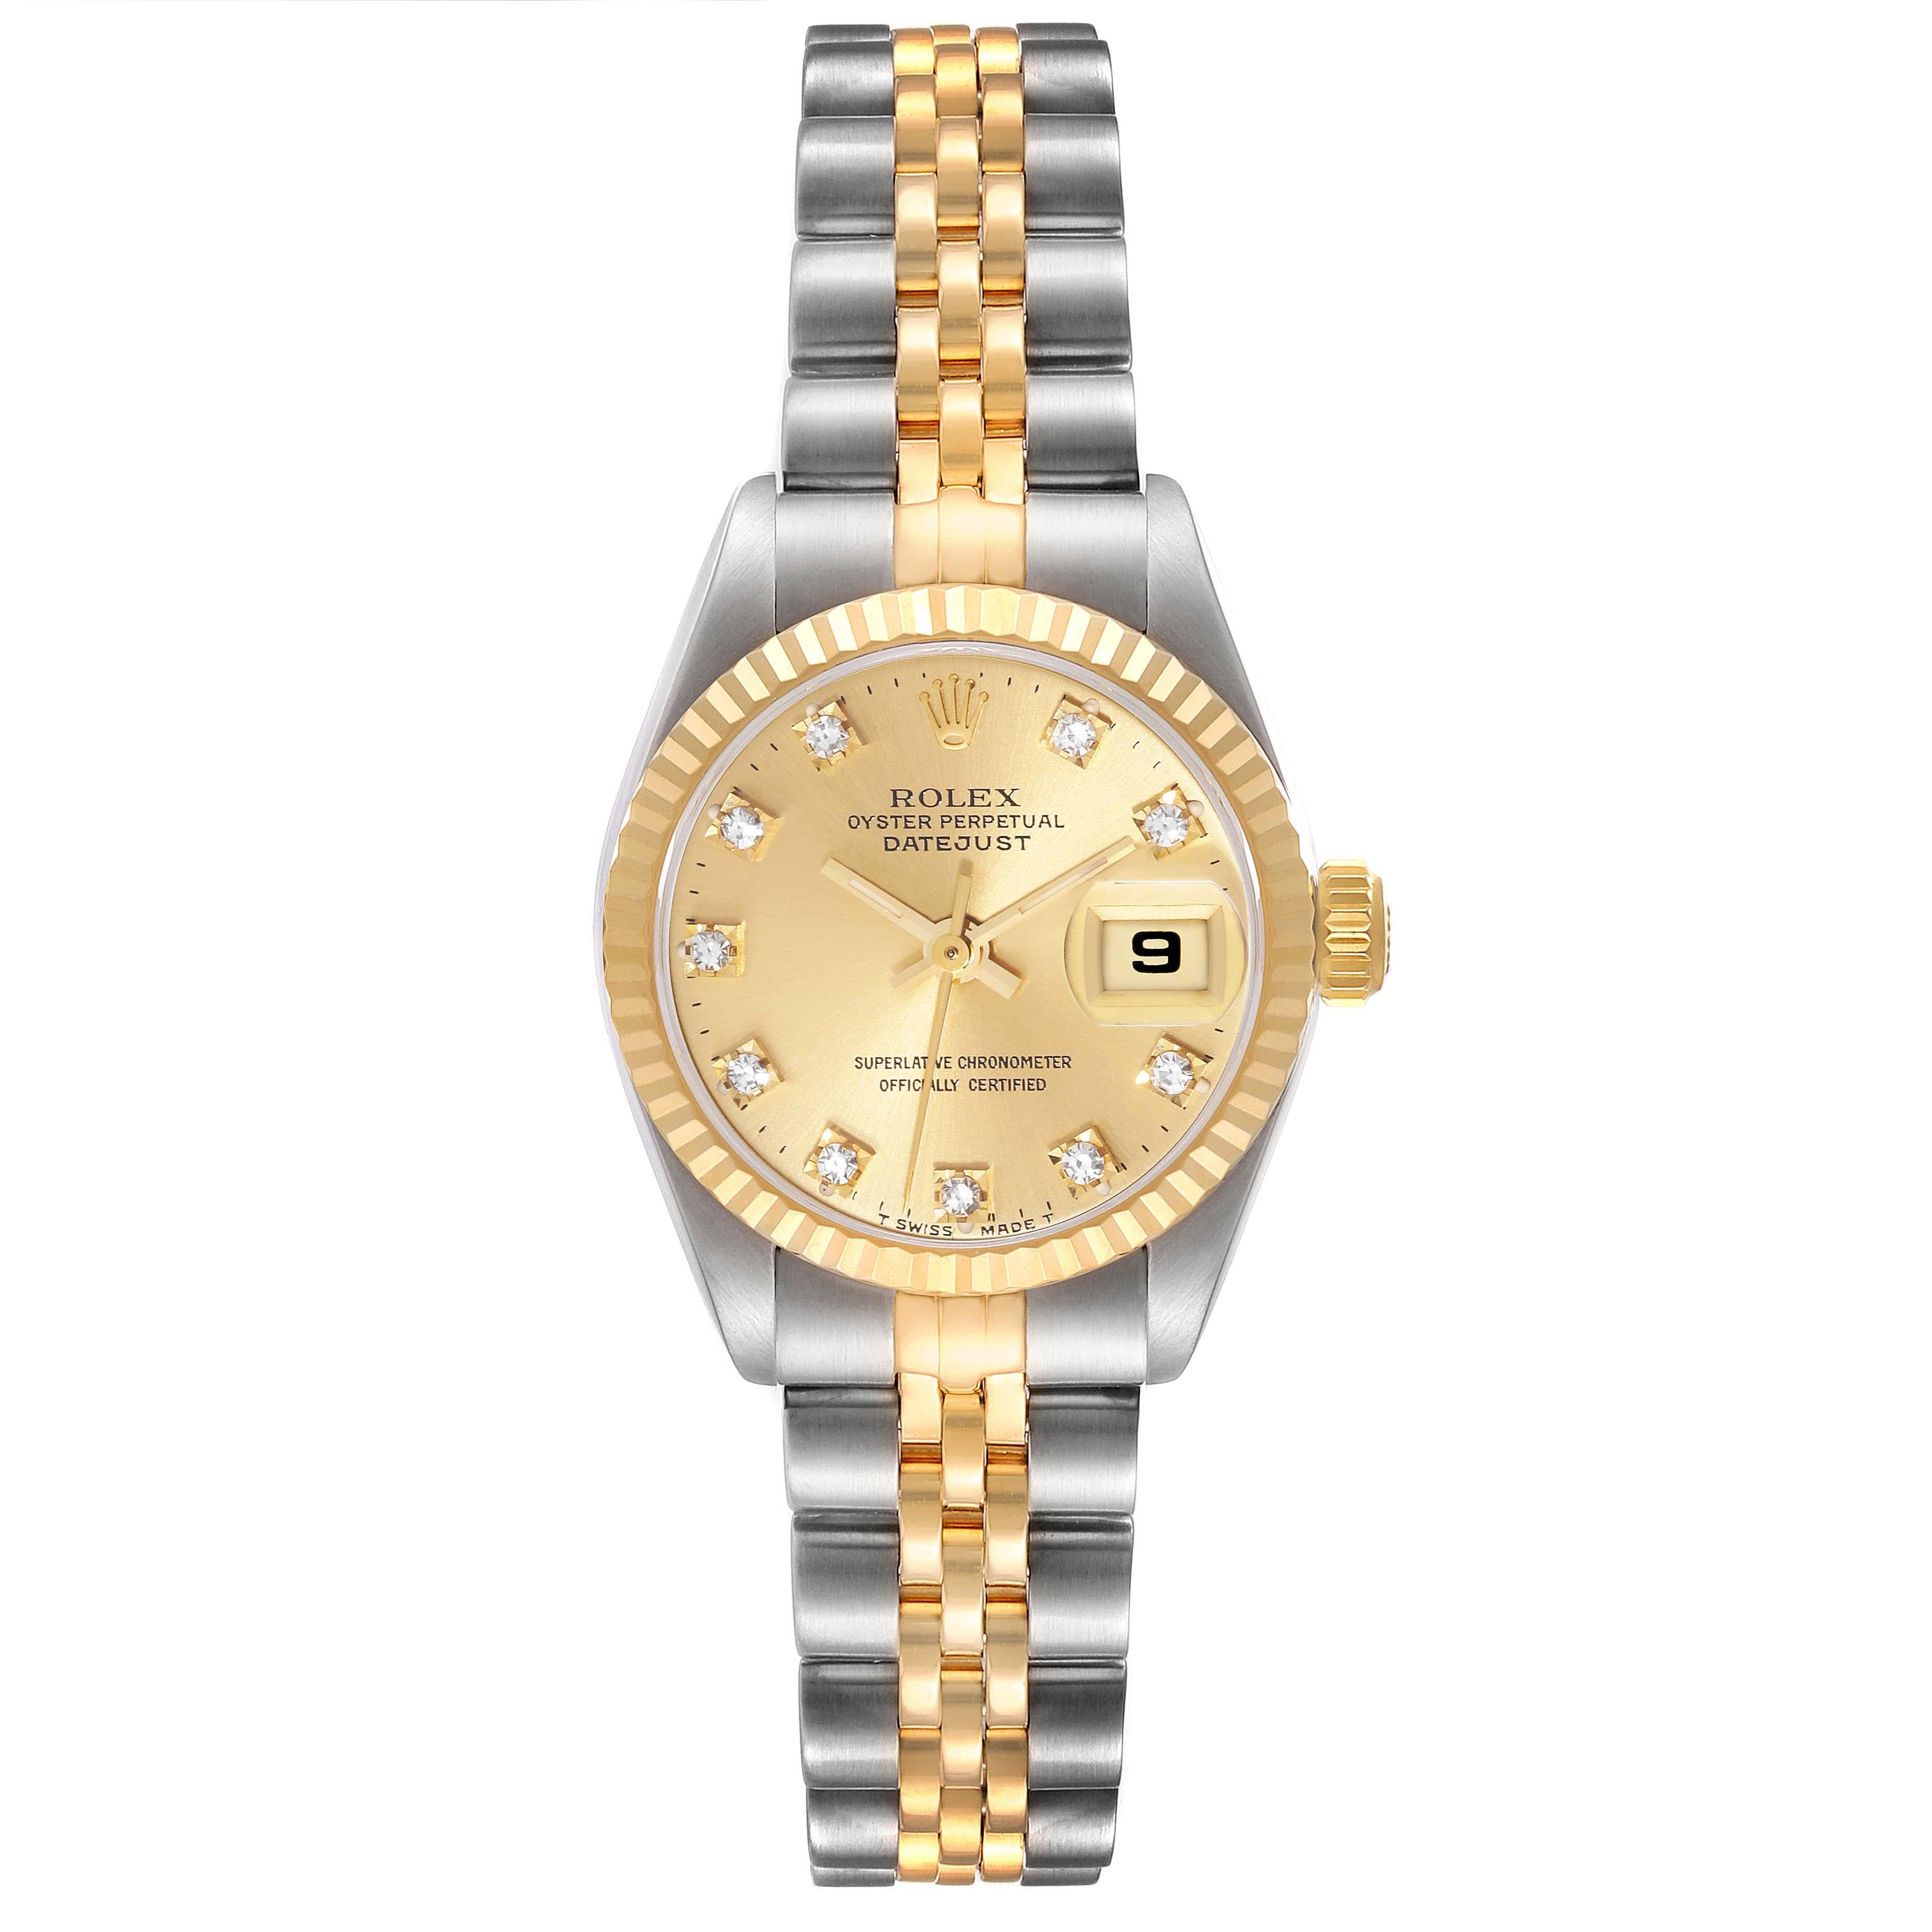 Rolex Datejust Steel Yellow Gold Diamond Dial Ladies Watch 69173. Officially certified chronometer automatic self-winding movement. Stainless steel oyster case 26.0 mm in diameter. Rolex logo on the crown. 18k yellow gold fluted bezel. Scratch